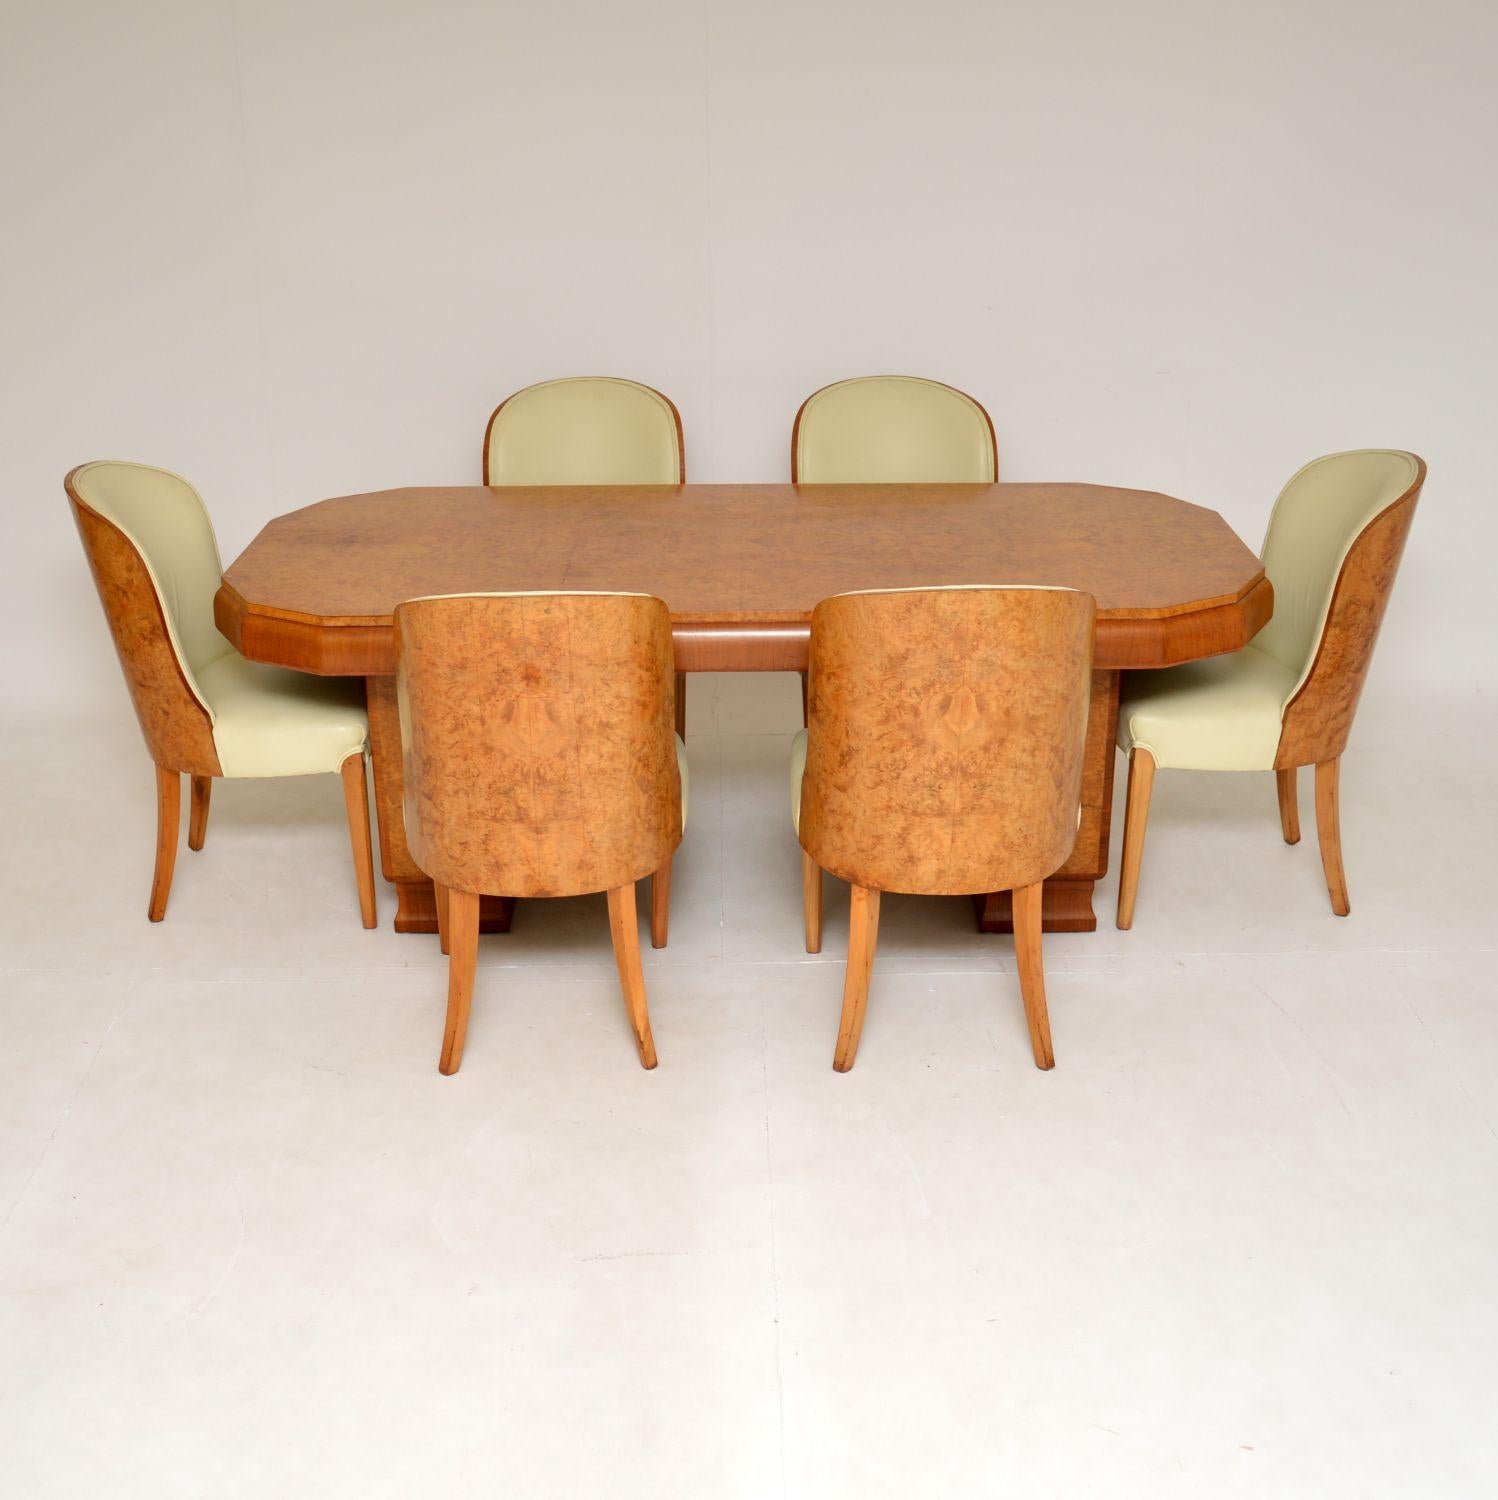 A stunning original Art Deco period cloud back dining suite in burr walnut by Harry & Lou Epstein. This was made in England, it dates from the 1930’s.
It is a slightly unusual model, and is of particularly fine quality. The twin pedestal dining